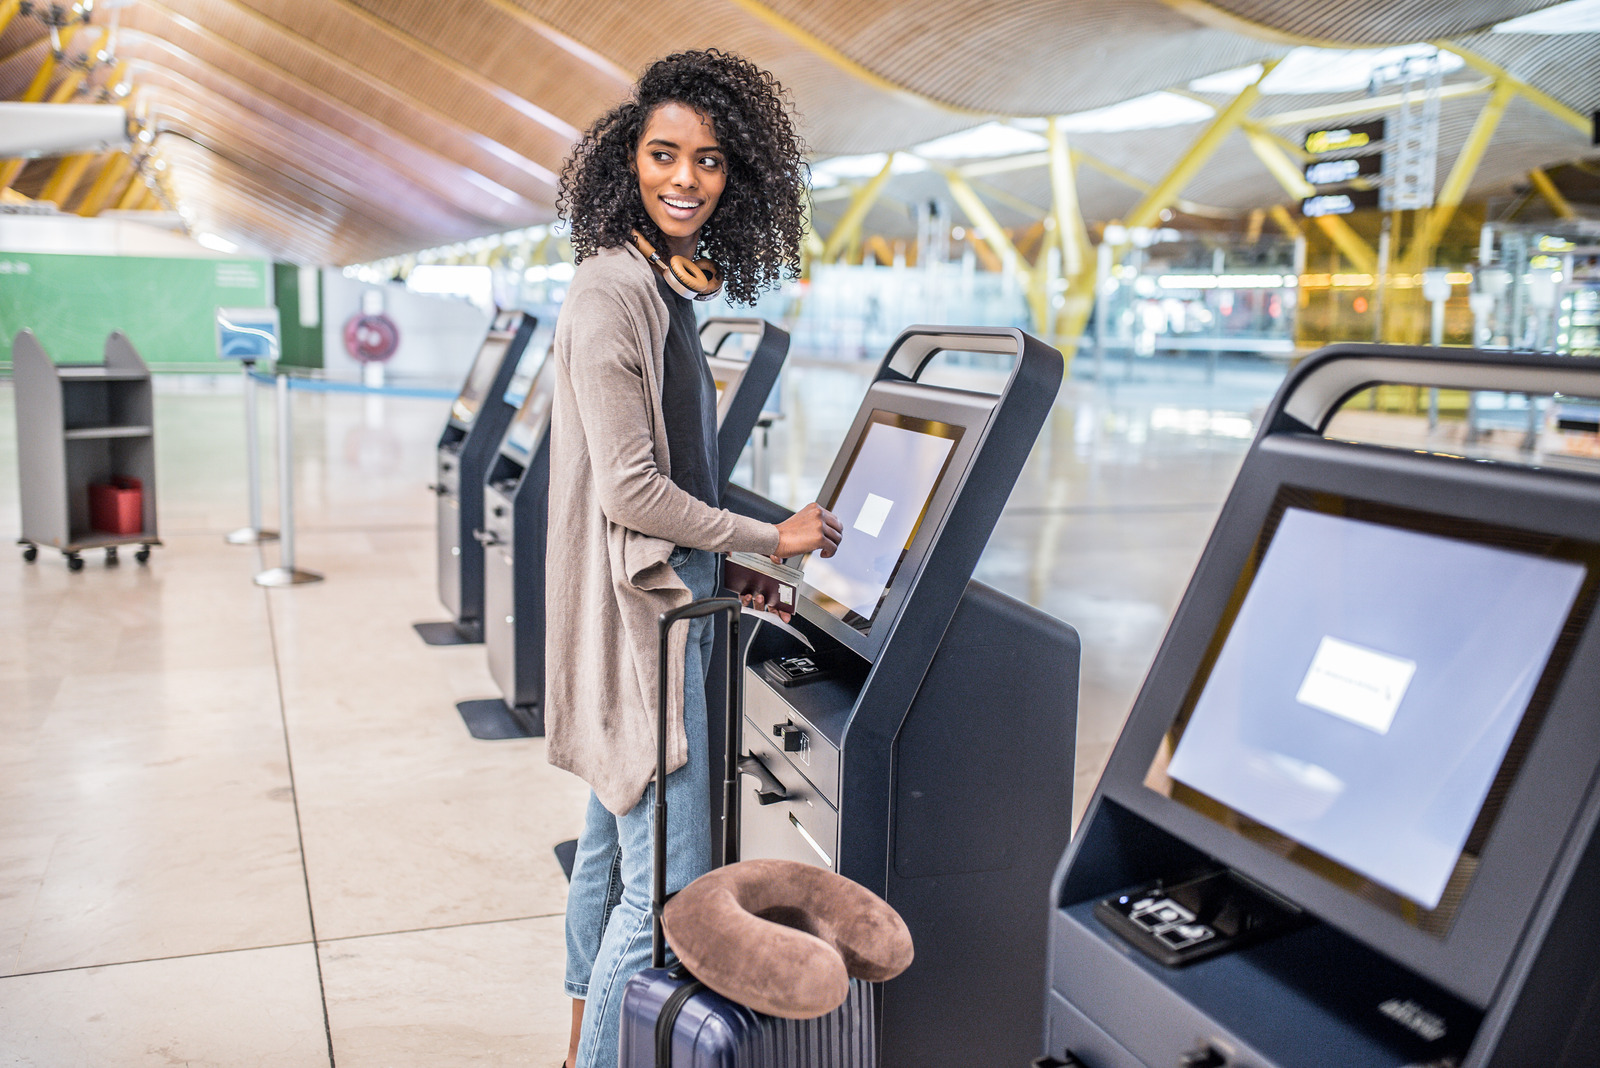 5 Things You Can Do To Have A Stress-Free Airport Experience This Holiday Season